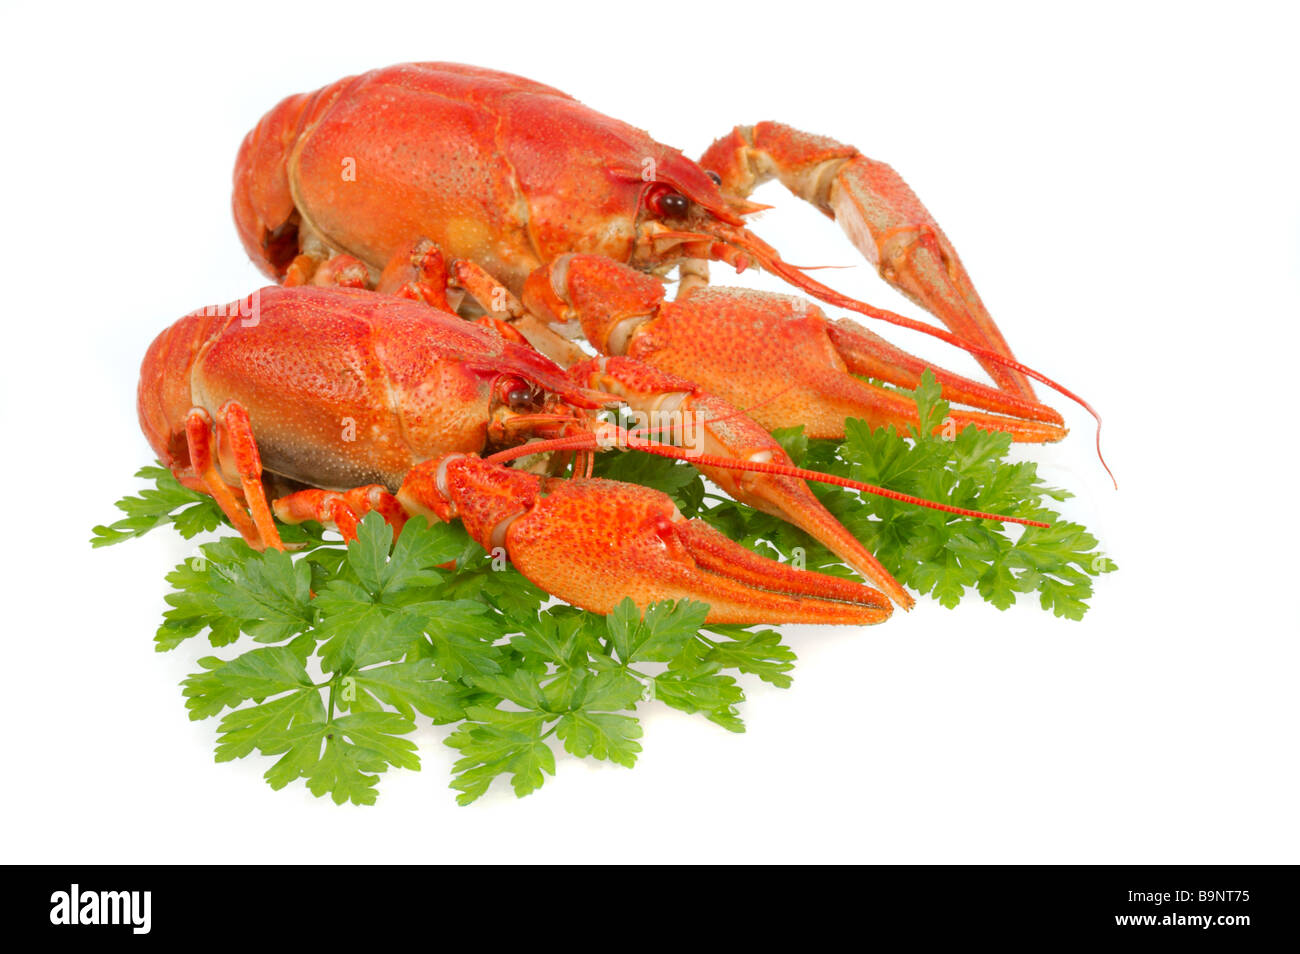 River crayfish on a white background It is very tasty and dietary food Stock Photo